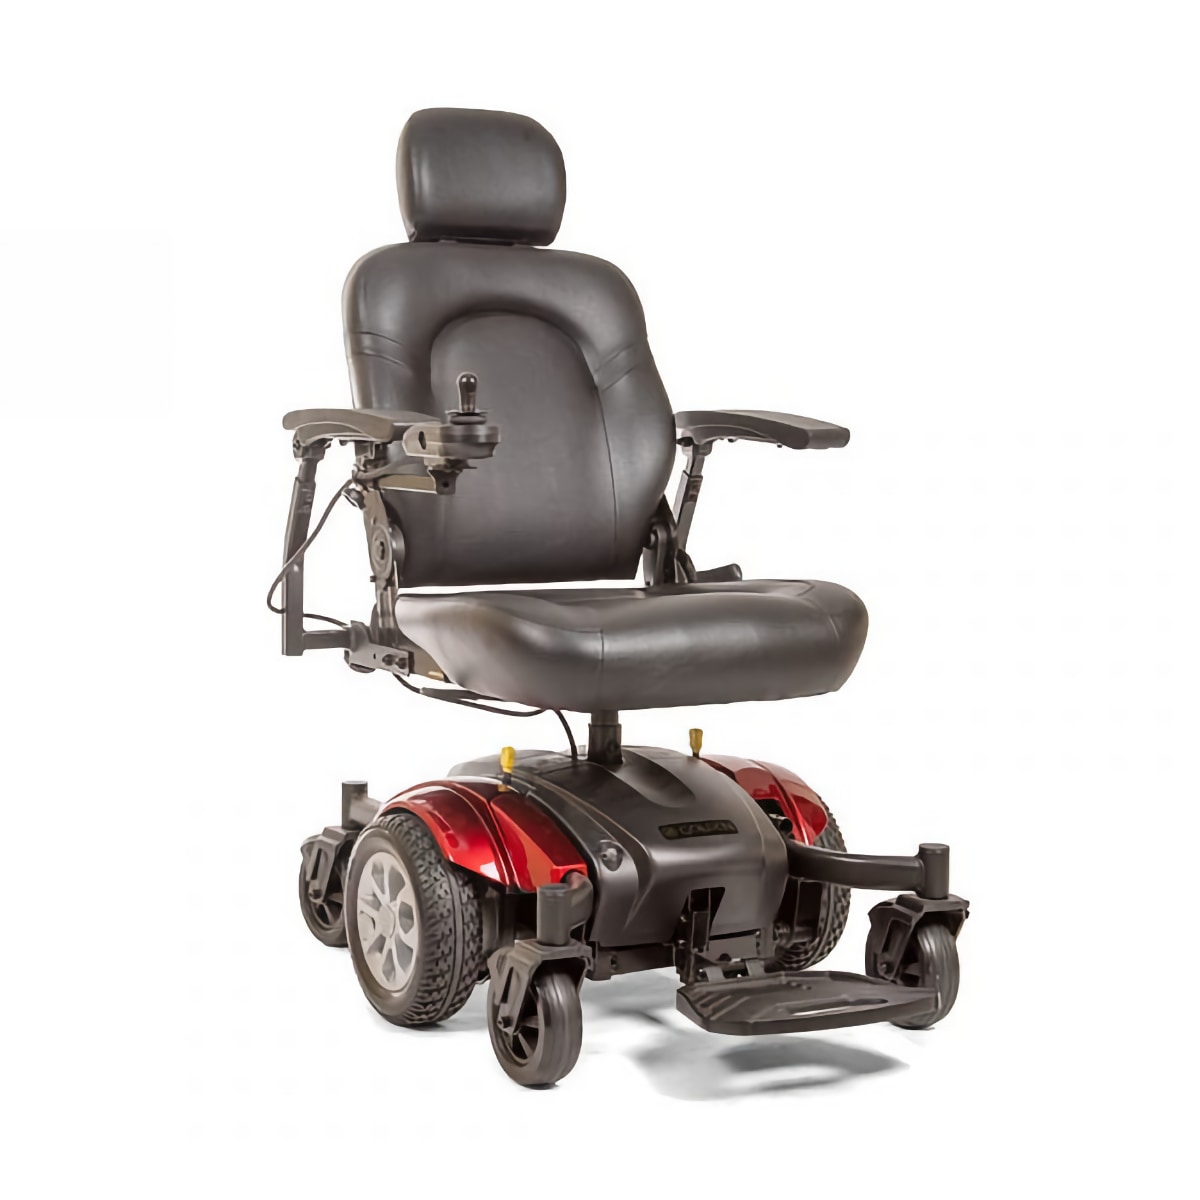 Golden Compass Sport power wheel chair with red accents